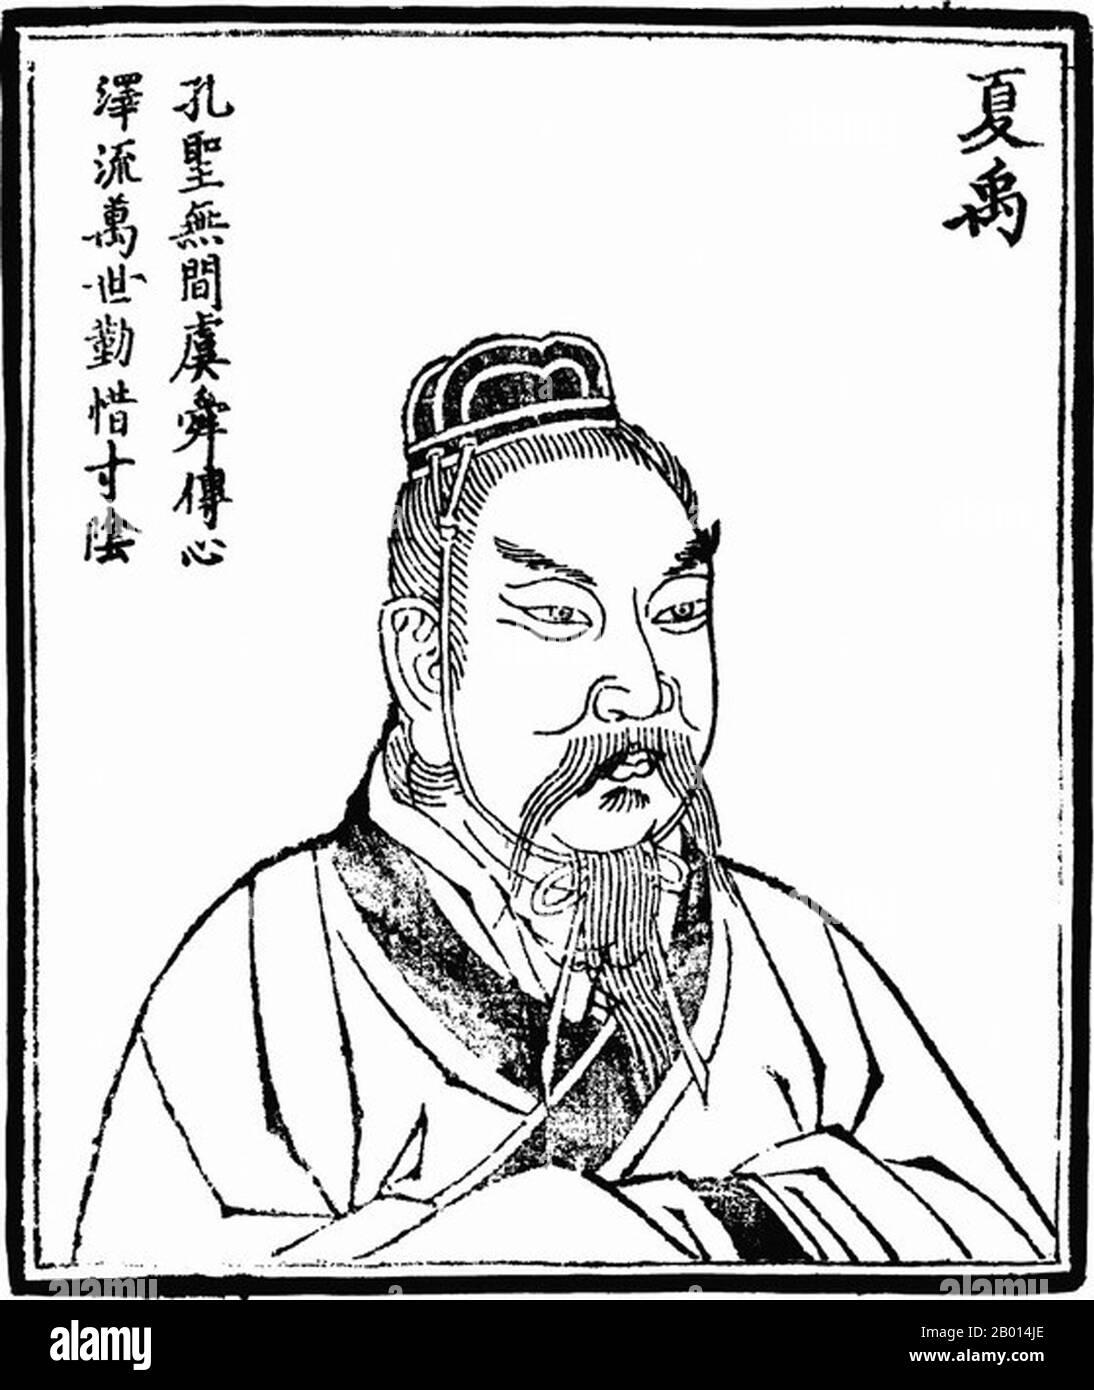 China: Yu the Great (c. 2123-2025 BCE), legendary founder of the Xia  Dynasty (2205-1766 BCE). Illustration, c. 1498. Da Yu, commonly known as Yu  the Great, was a mythical king of ancient